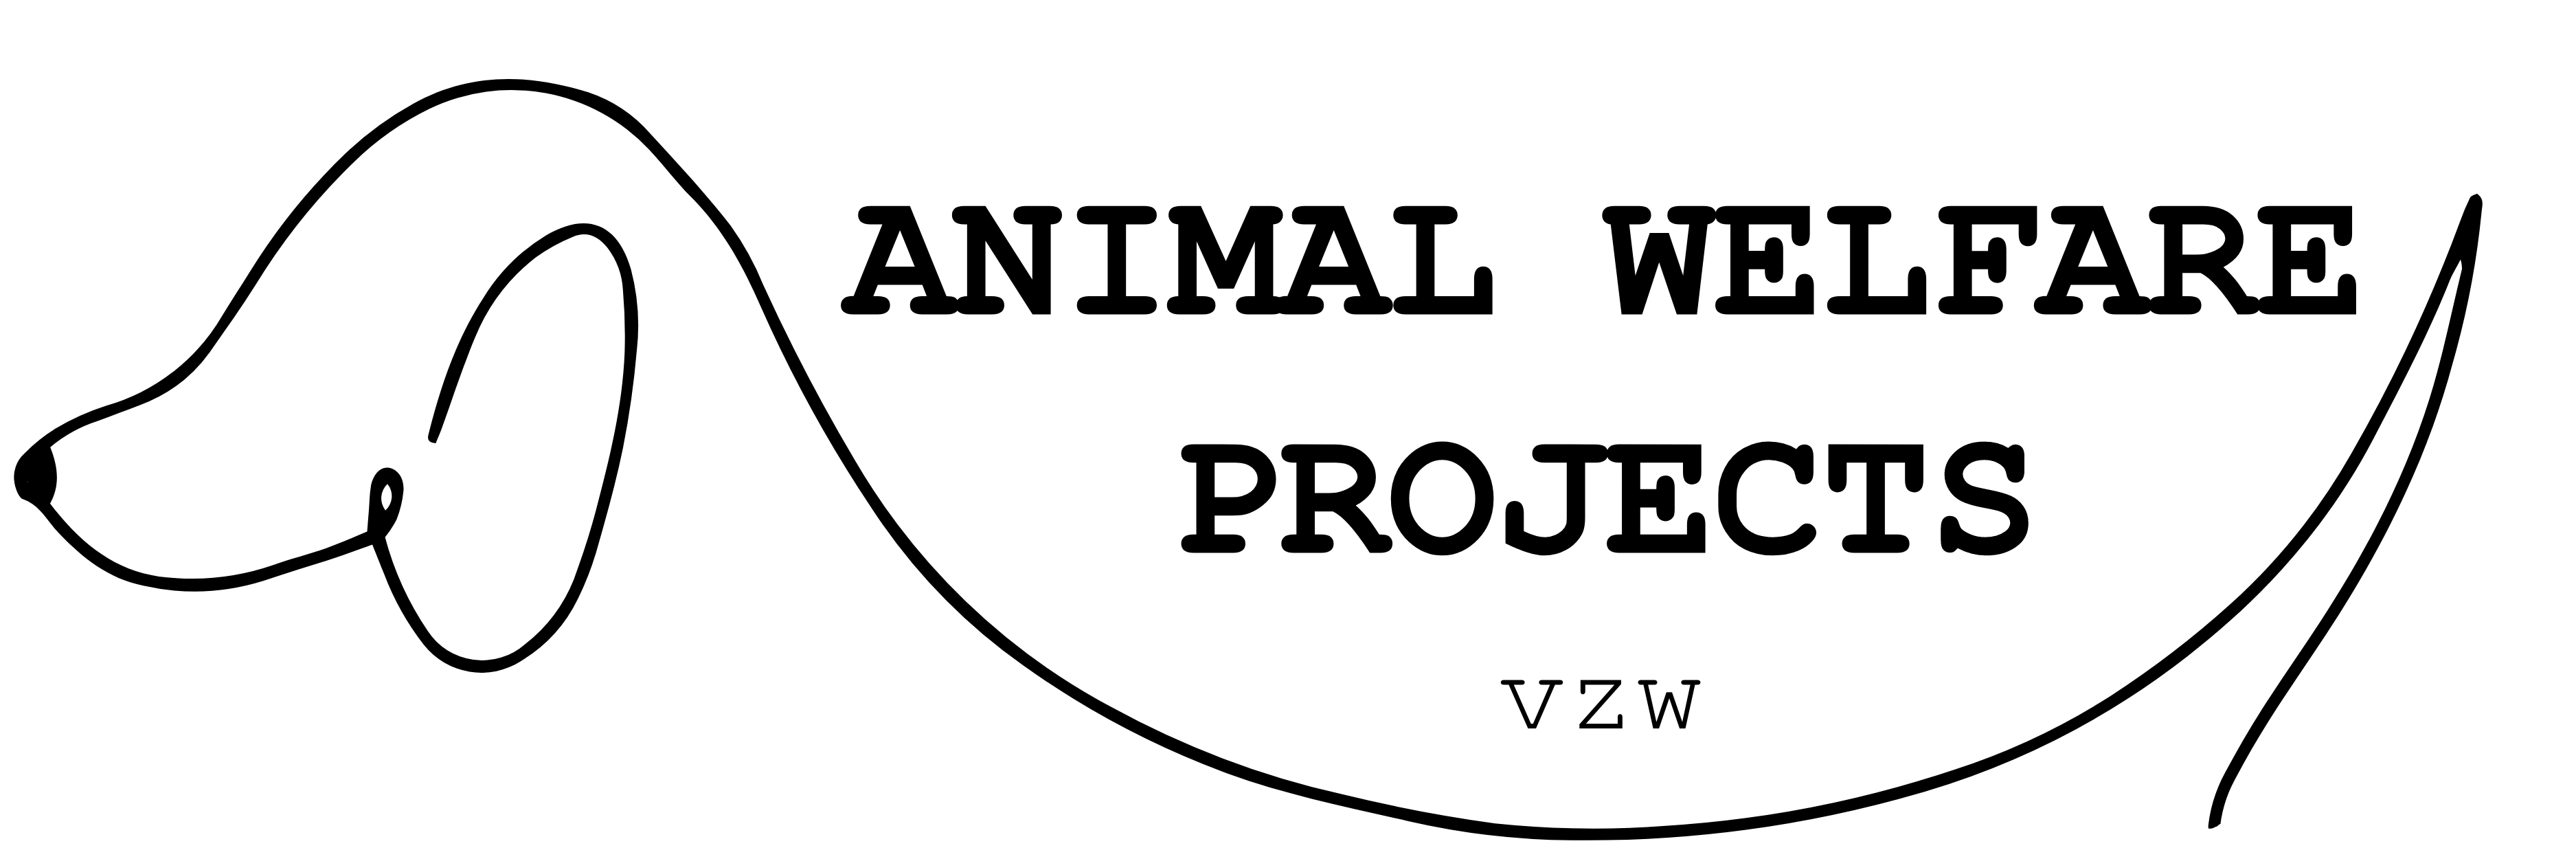 Animal Welfare Projects vzw